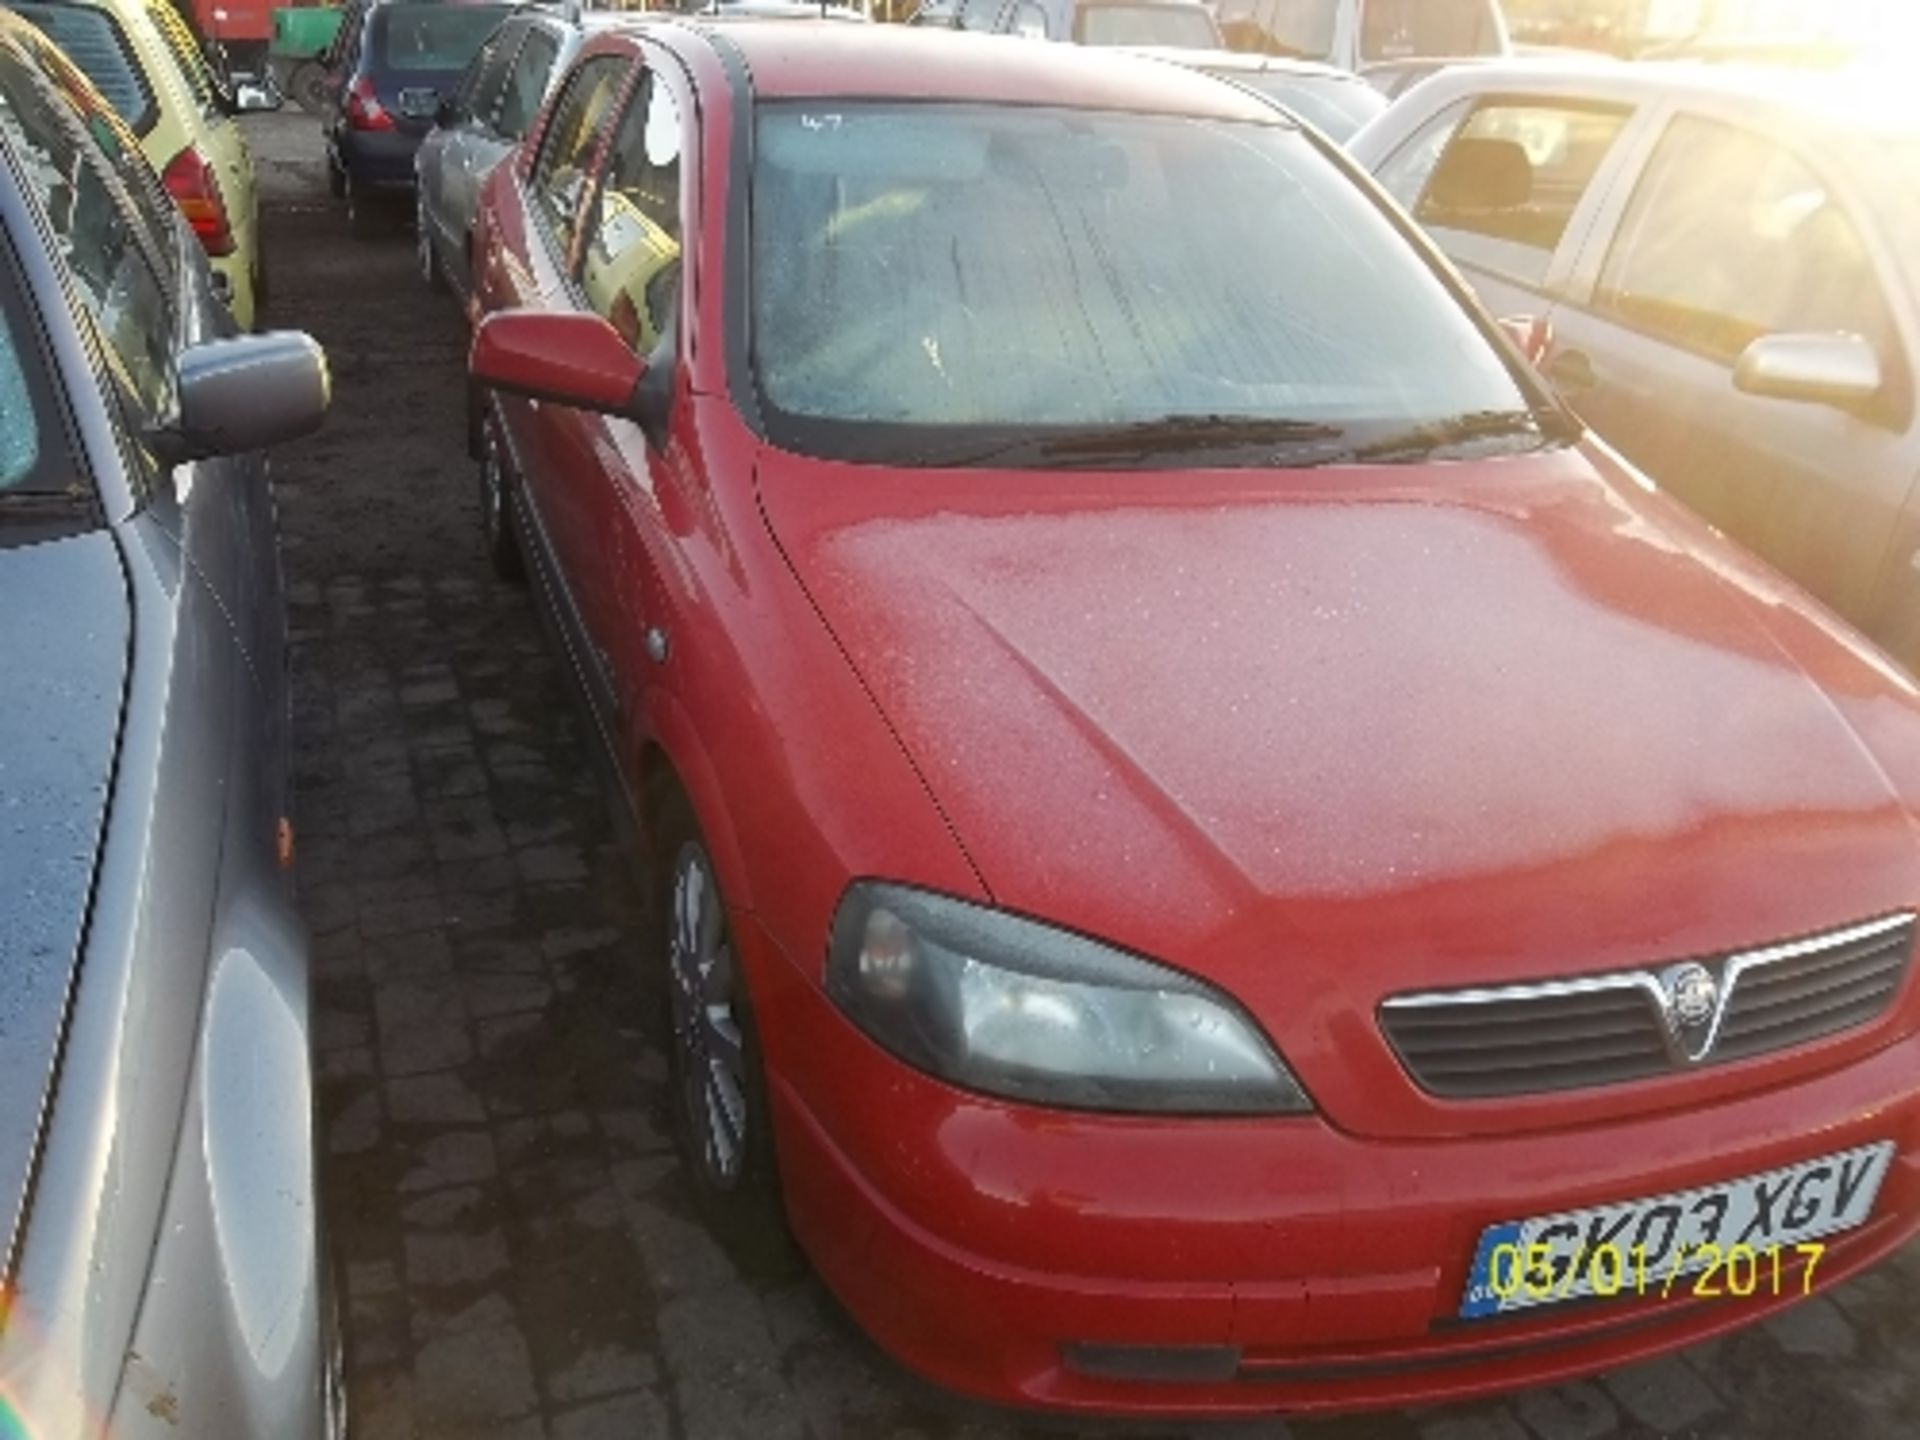 Vauxhall Astra SXI 16V - GK03 XGV Date of registration: 01.03.2003 1598cc, petrol, manual, red - Image 2 of 4